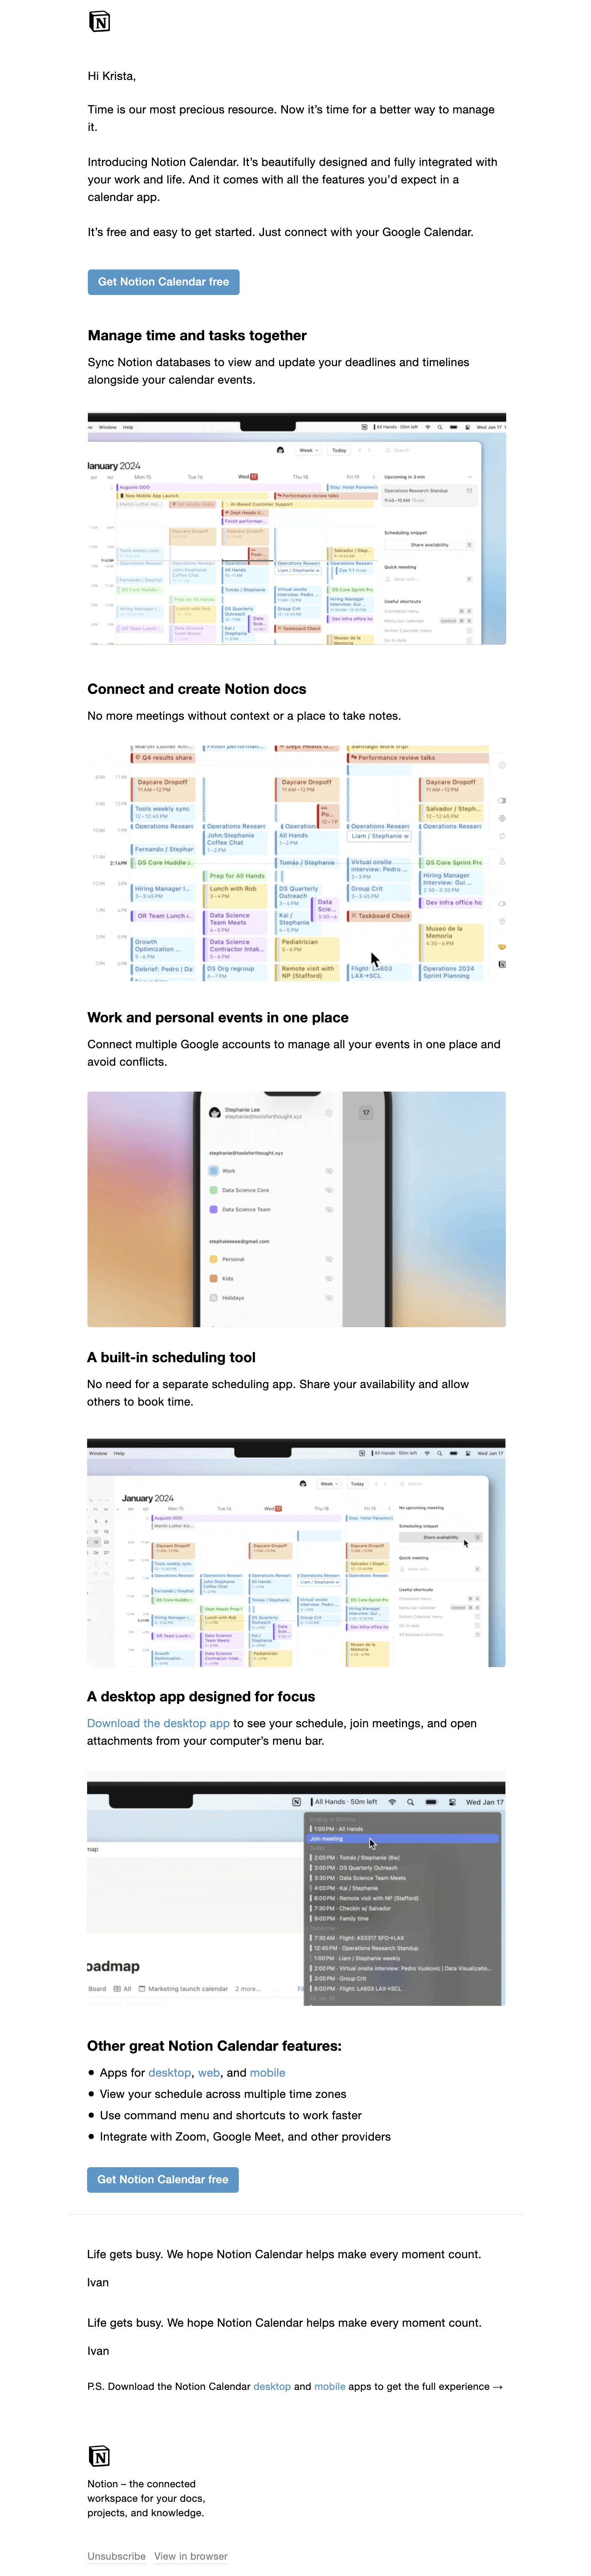 SaaS Product Launch Emails: Screenshot of Notion's launch email for Notion Calendar